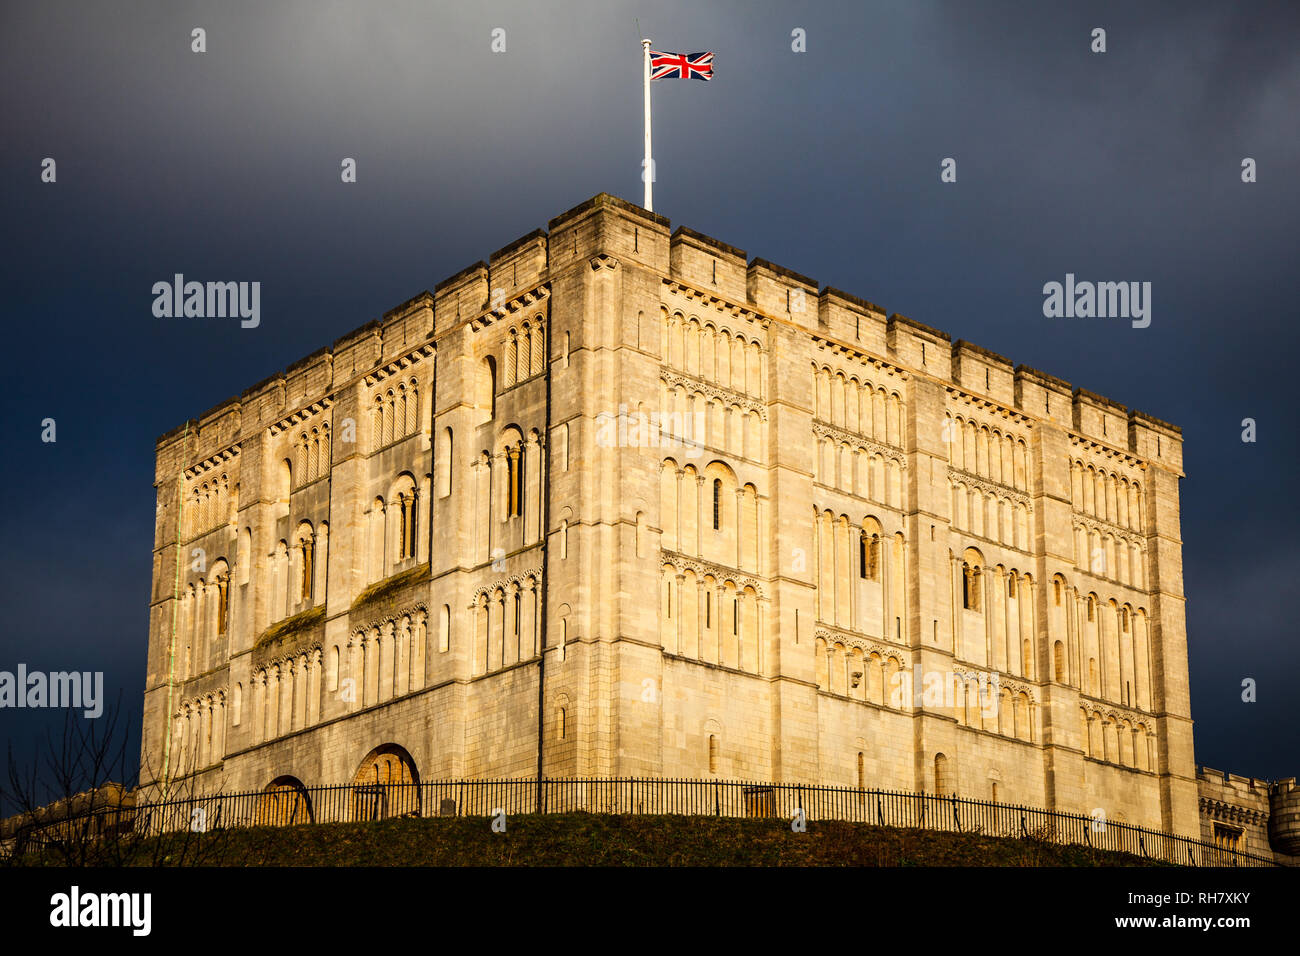 Norwich Castle Norwich - Norman castle founded by William the Conqueror around 1075 the keep pictured here was built between 1095 and 1110. Stock Photo